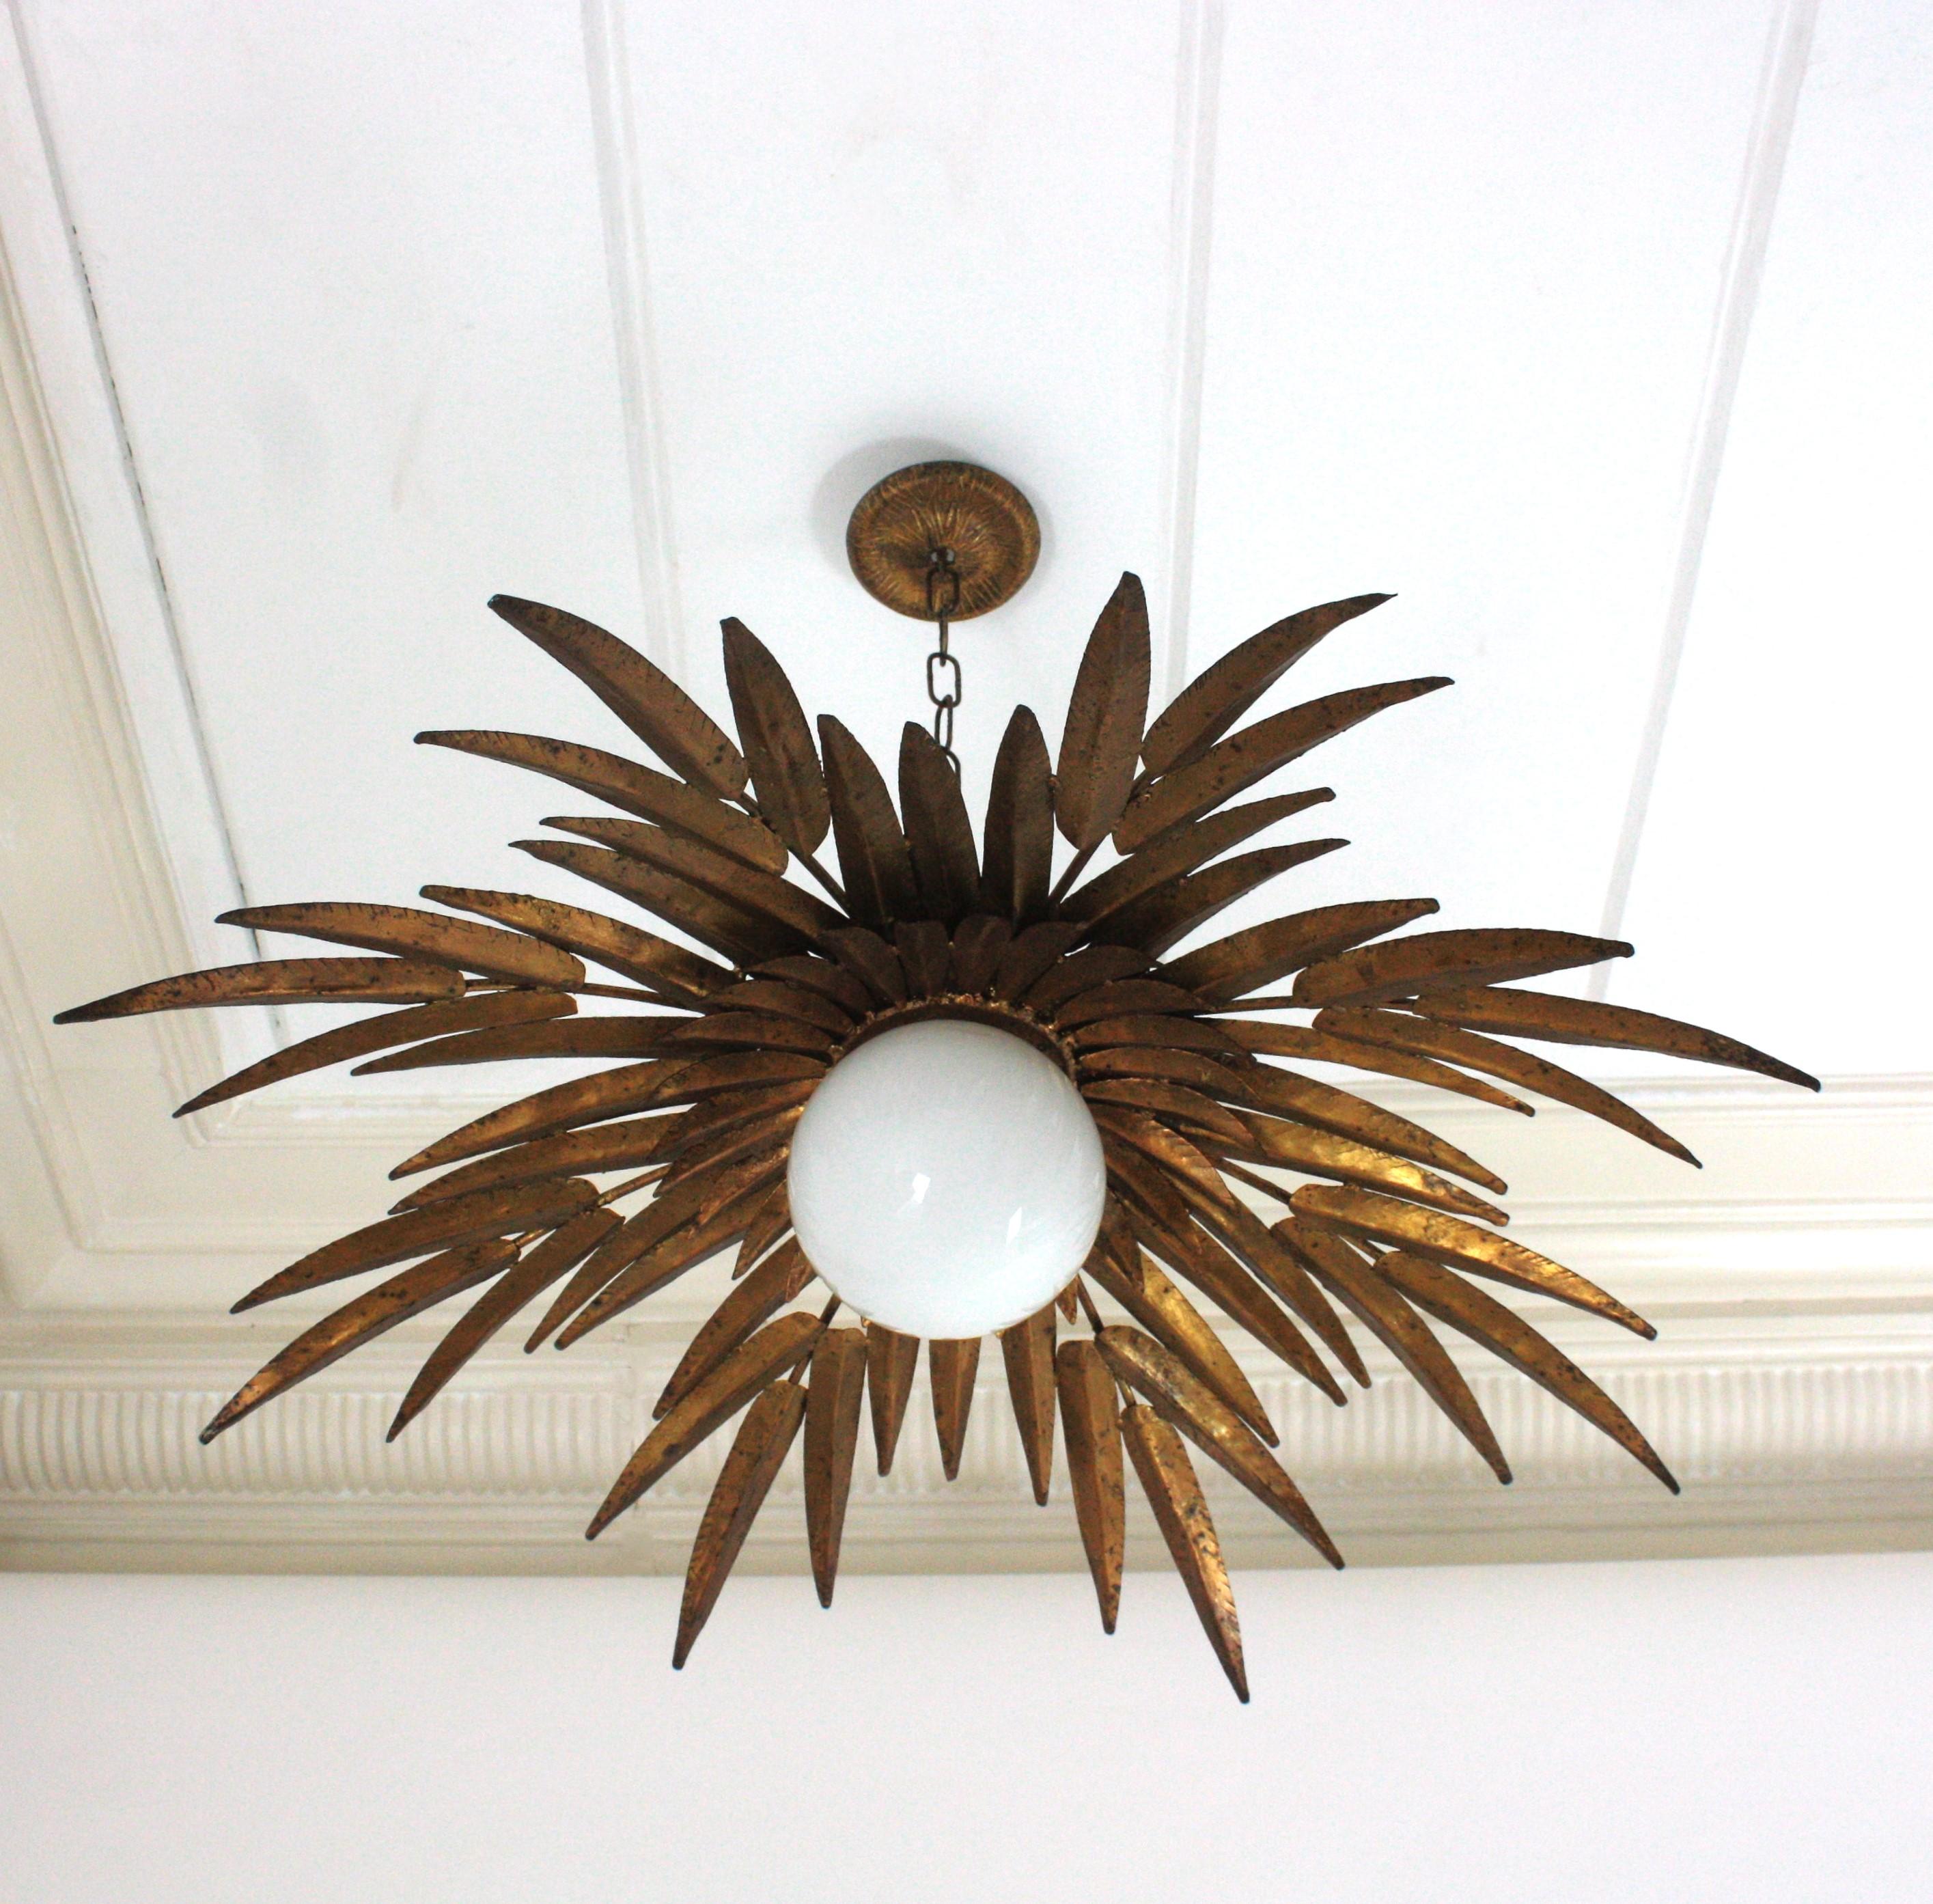 Large Spanish Sunburst Leaves Light Fixture in Gilt Iron with Milk Glass Globe

Outstanding Foliage Sunburst Flush Mount Ceiling Light with Milk Glass Globe by Ferro Art, Spain, 1950s
Large size.
To be used as ceiling light fixture or as chandelier